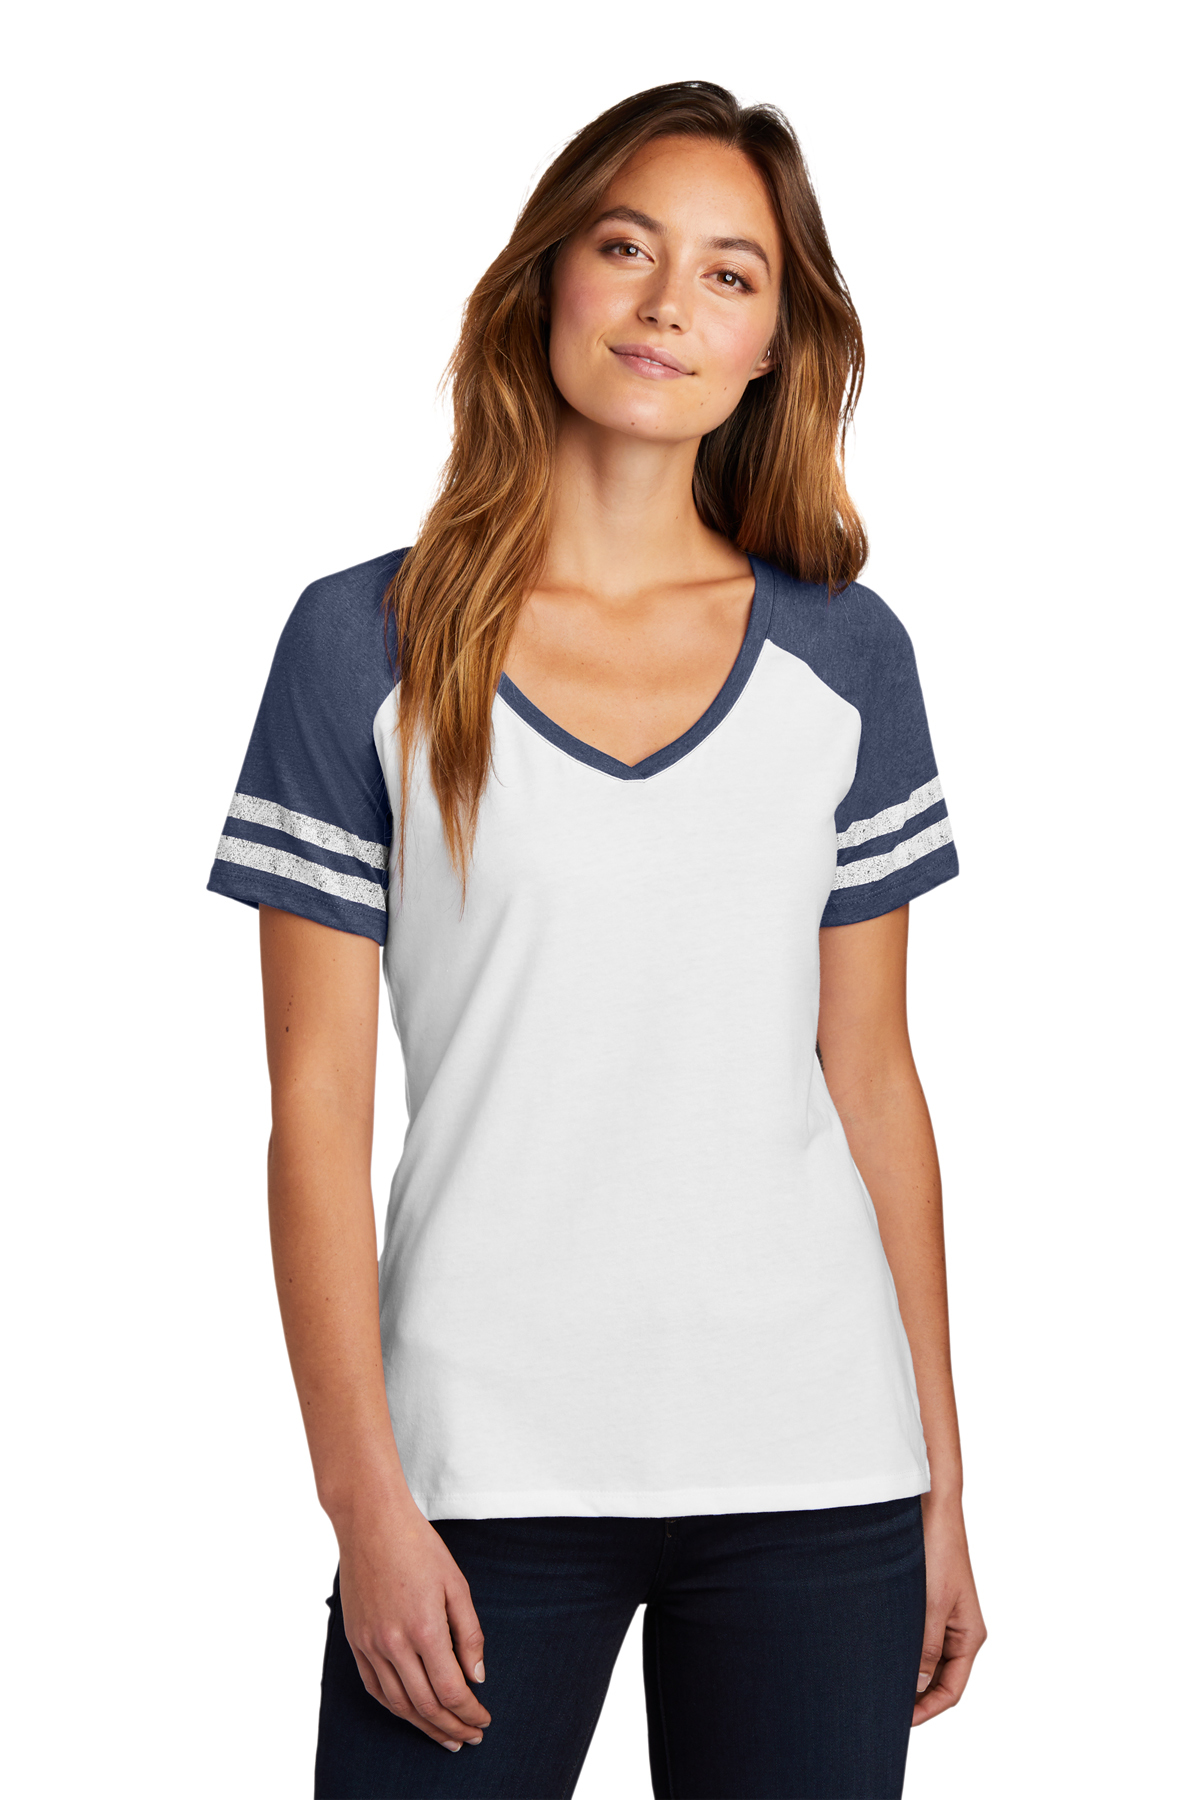 District Women’s Game V-Neck Tee | Product | SanMar